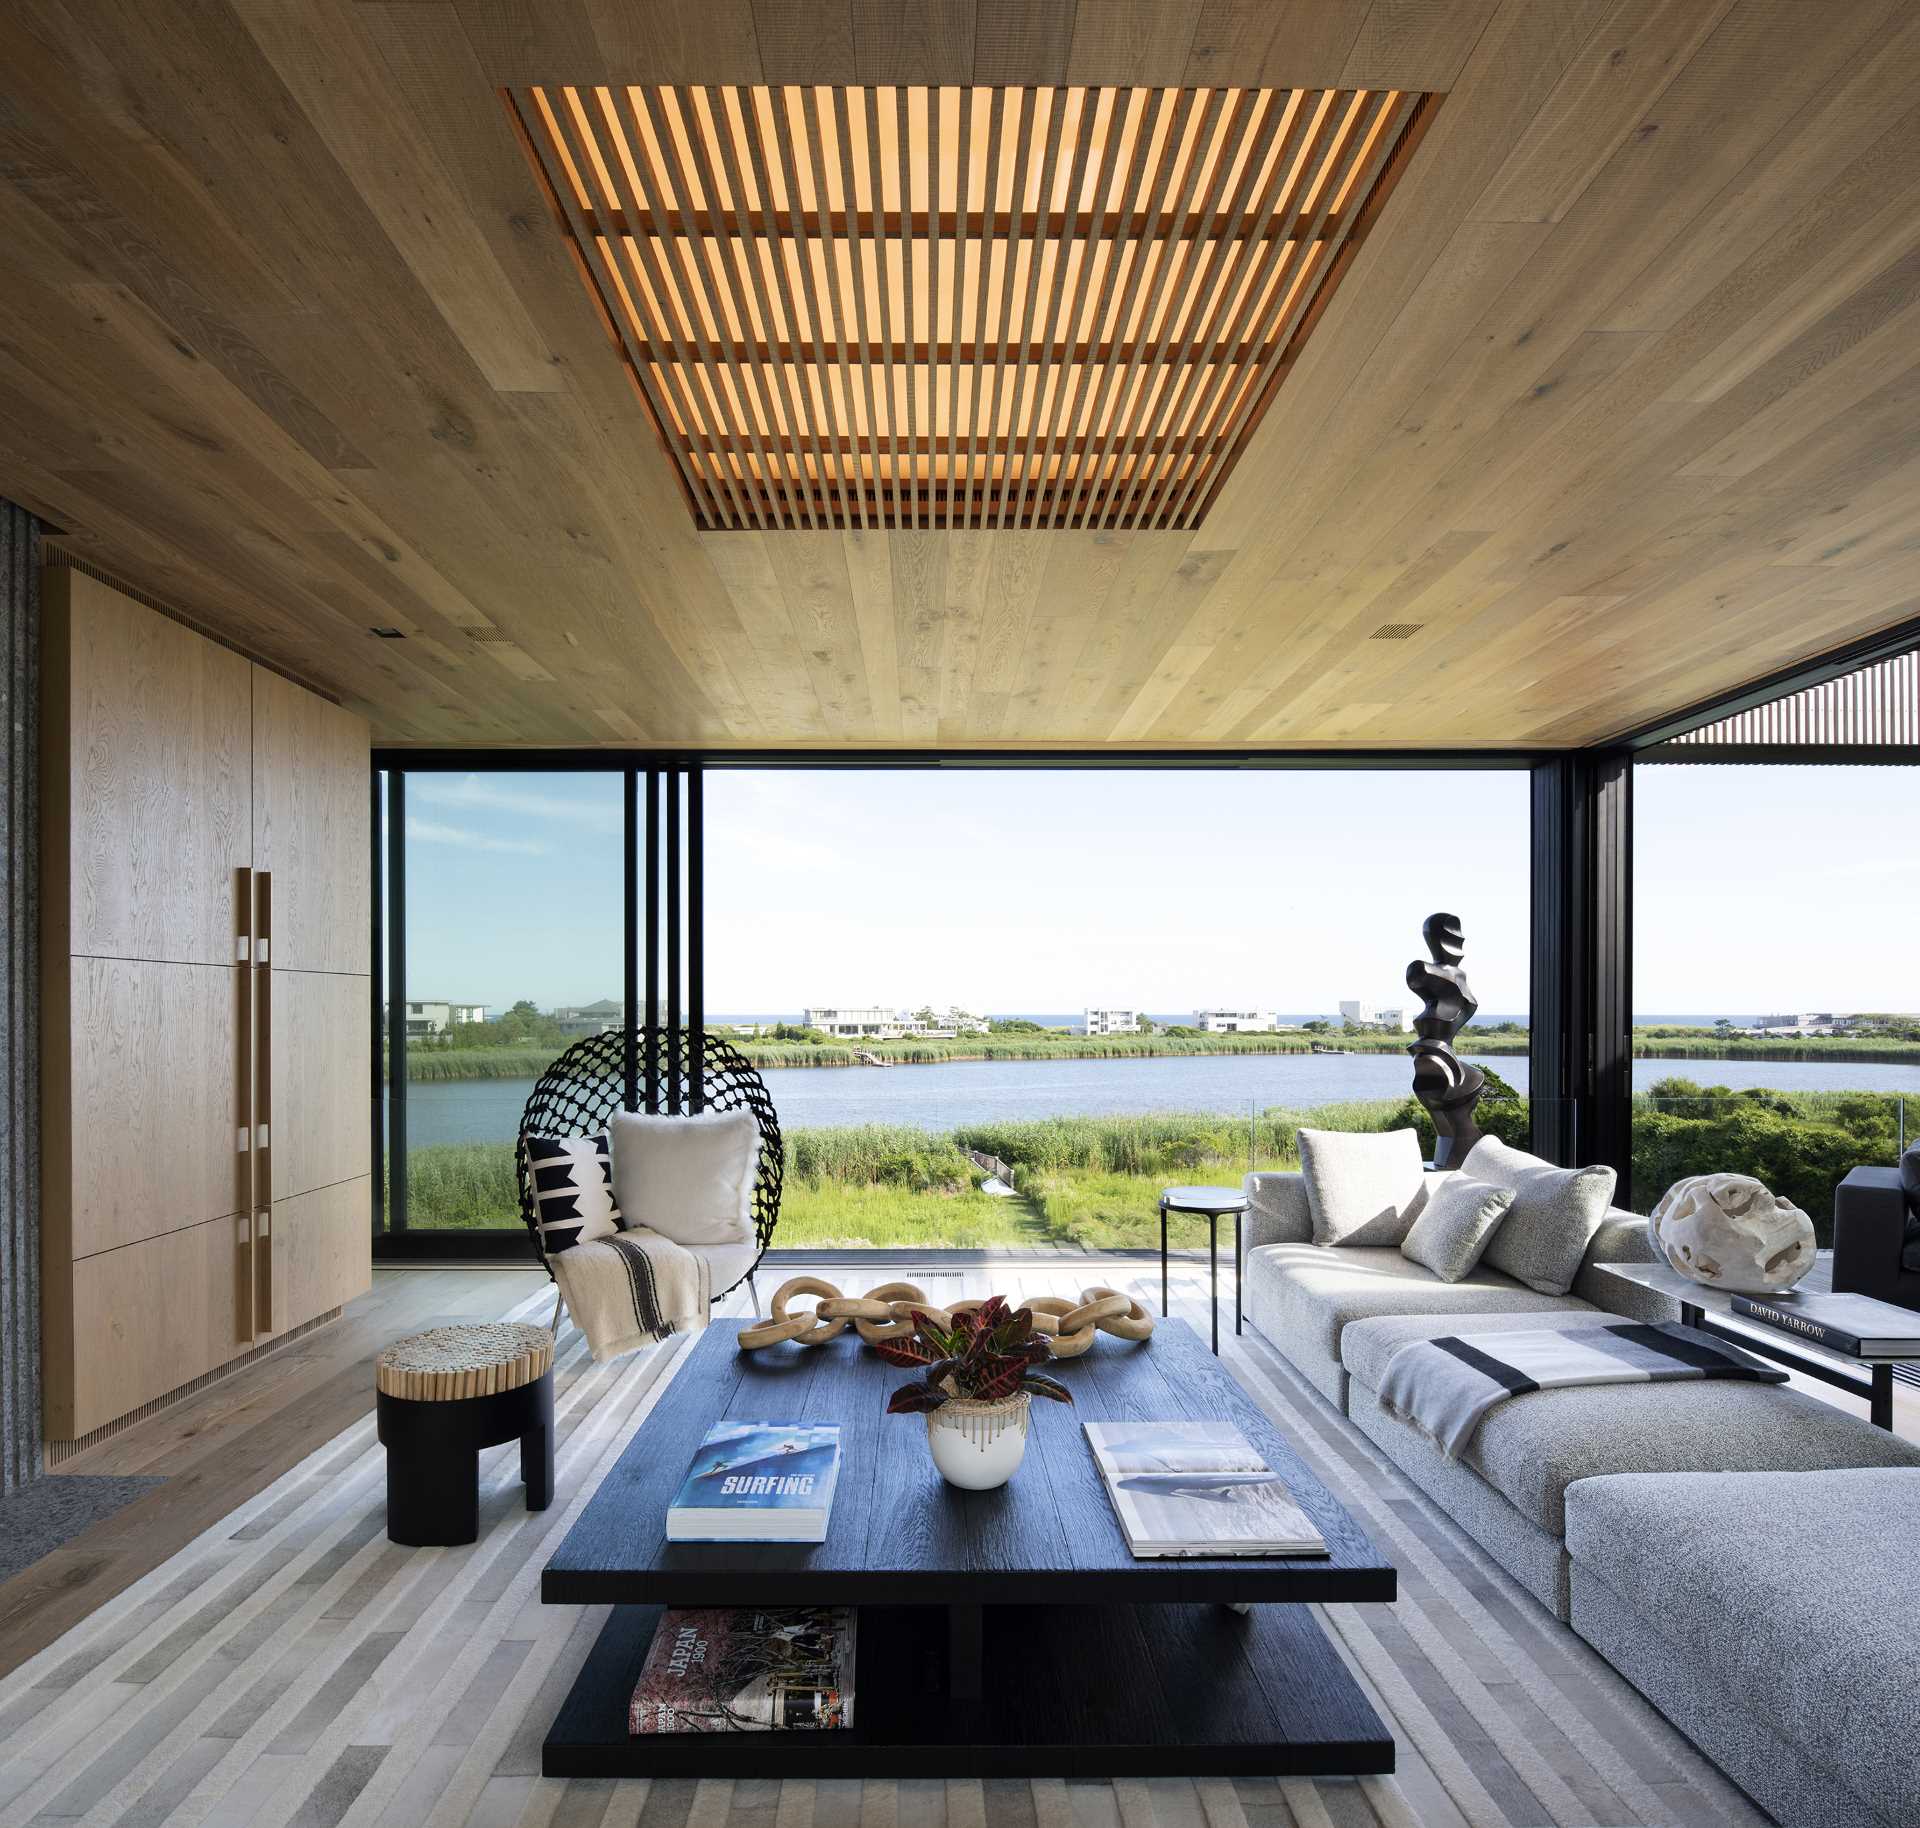 The living room of this modern house includes a wood ceiling with large operational sliding glass walls, while glass railings provide an uninterrupted view.